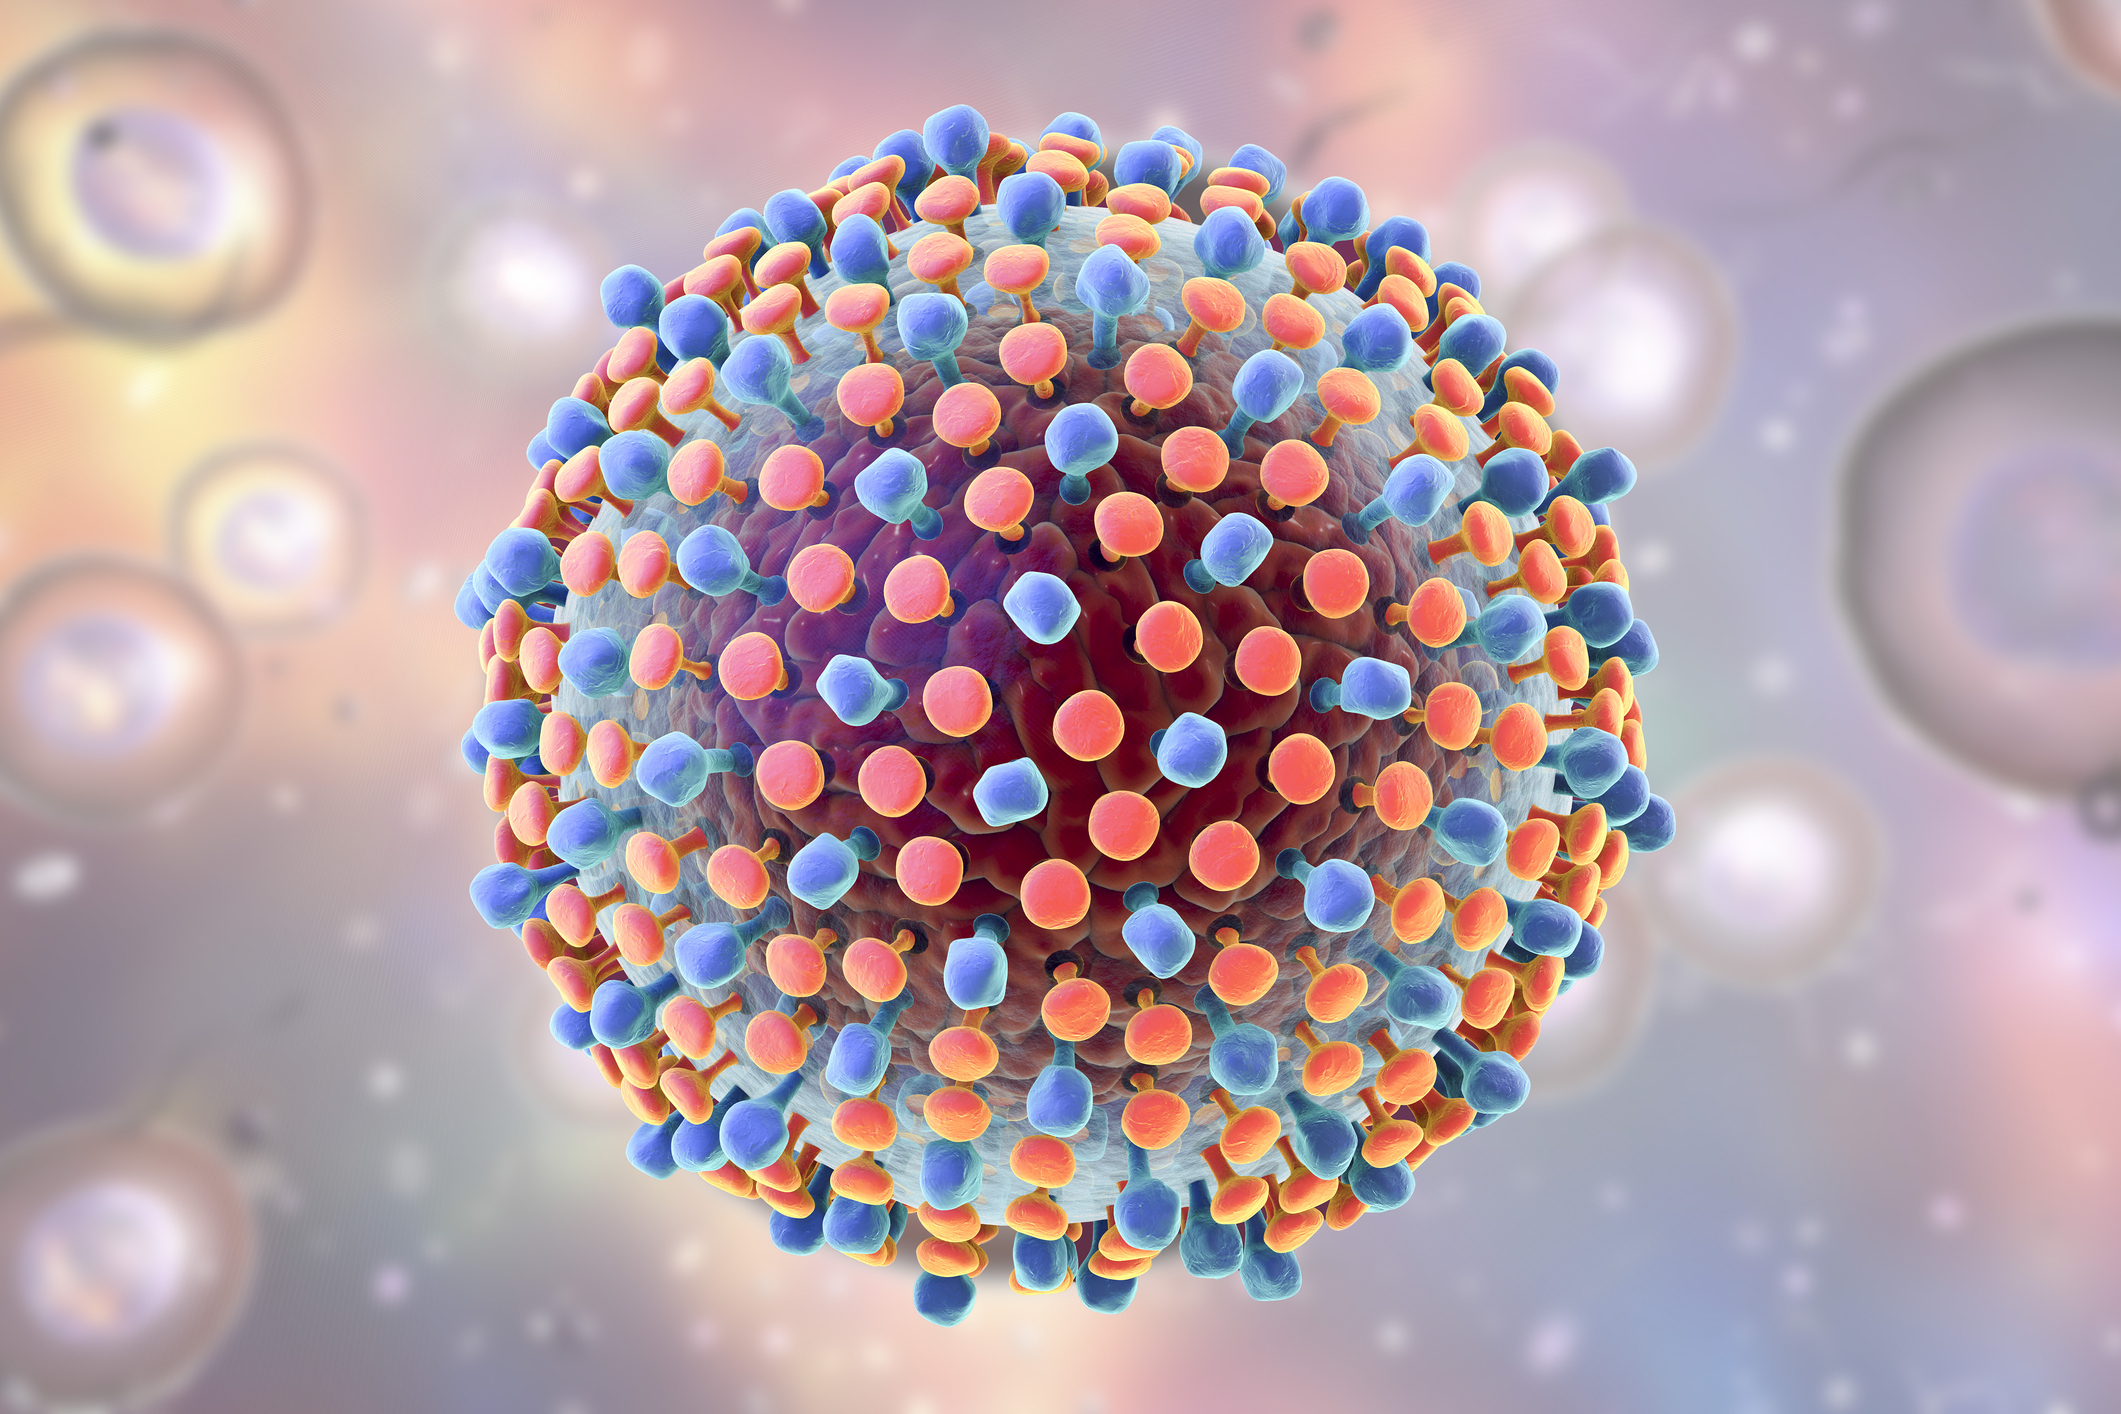 It’s ‘absolutely feasible’ to eliminate hepatitis C. Here’s how. | The